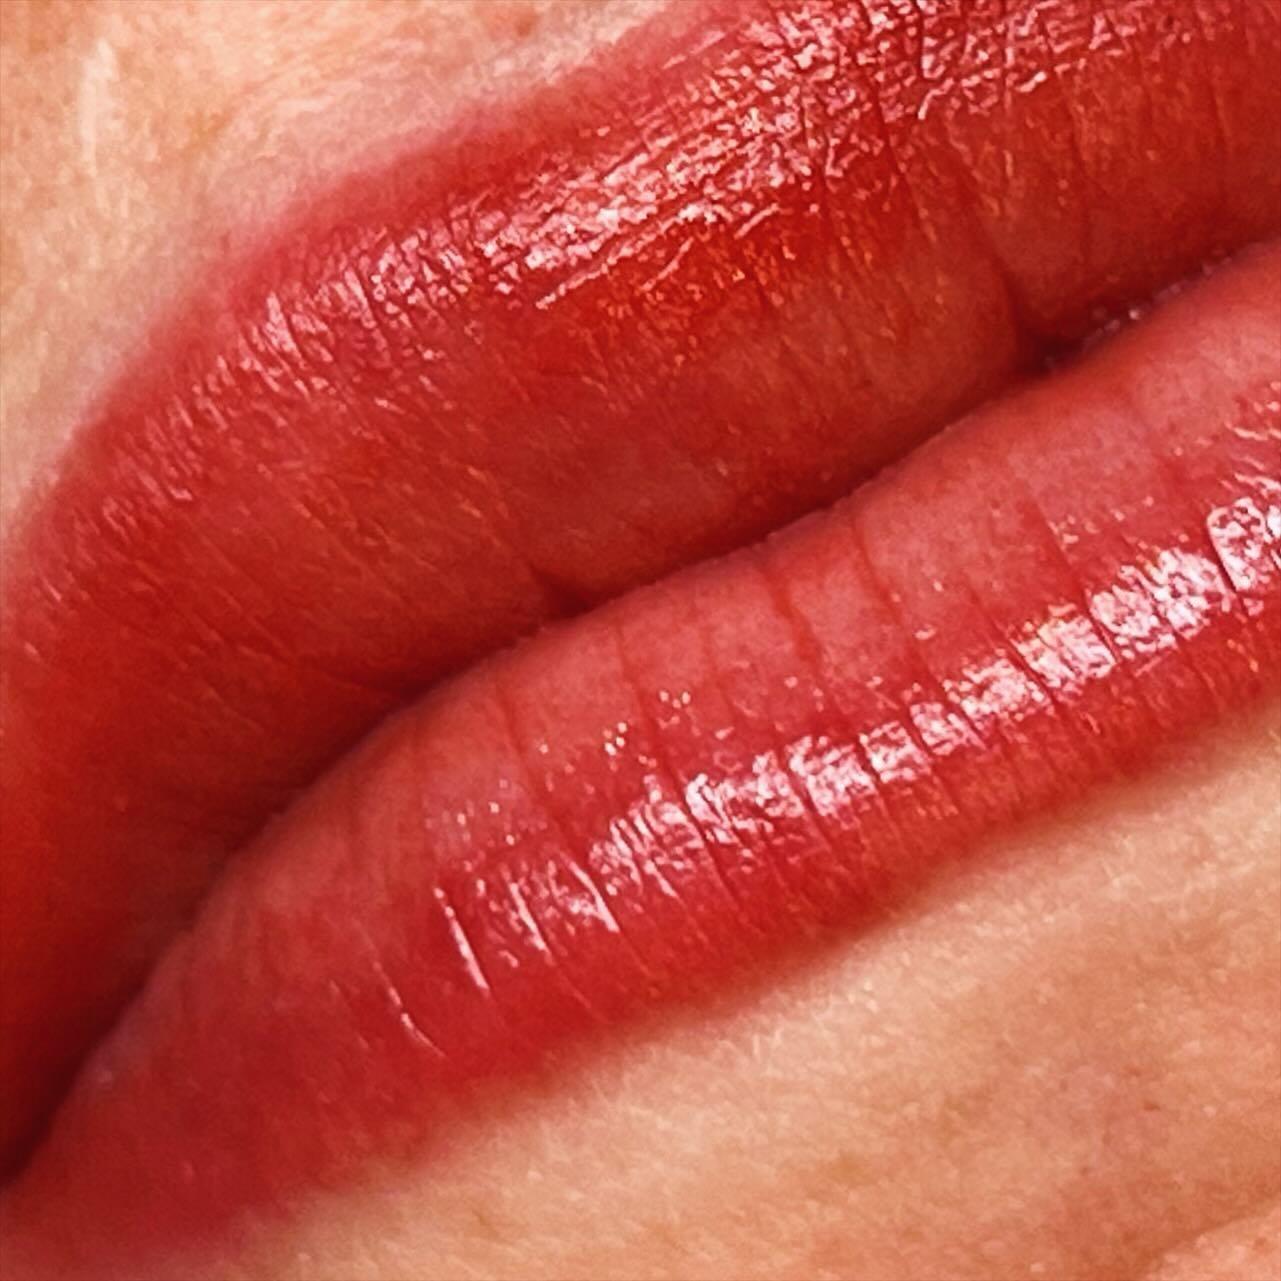 Did you know that the inner side of the lip is the hardest to implant pigment?